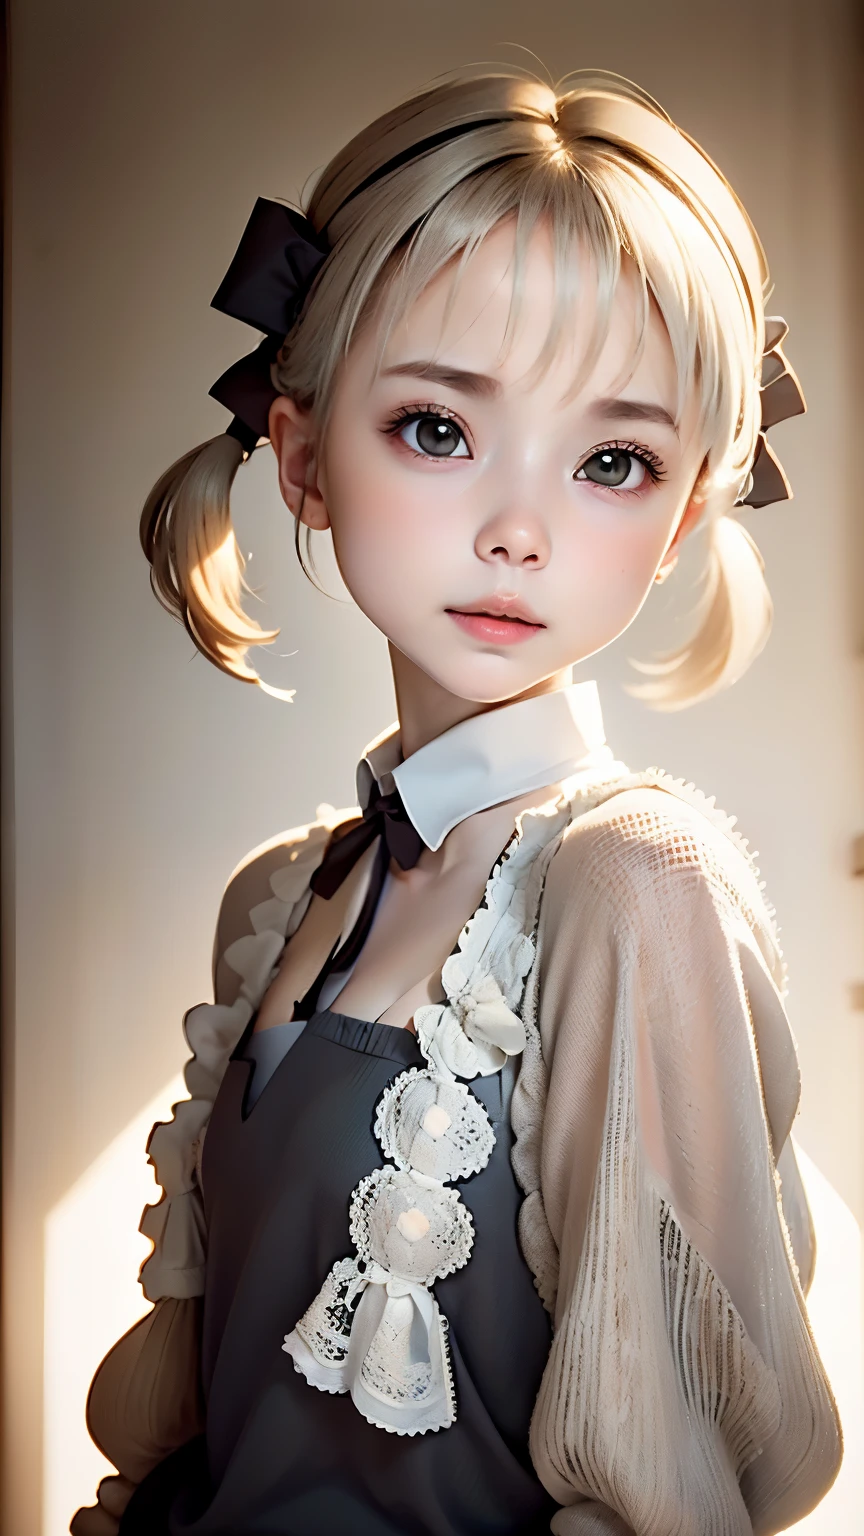 portrait、masterpiece:1.3、one girl、Upper body、Upper body、baby face、natural look、very cute、charming eyes、small breasts、platinum blonde hair、shortcut、短いtwin tails:1.3、twin tails、plump lips、no makeup、luxury shirt with lace、black shirt、RAW photo、最high quality、High resolution、Super detailed、high quality、Detailed details、８ｋ、(((blurred background、gray walls、gray background、White world、studio:1.5、cinematic lighting、professional photographer)))